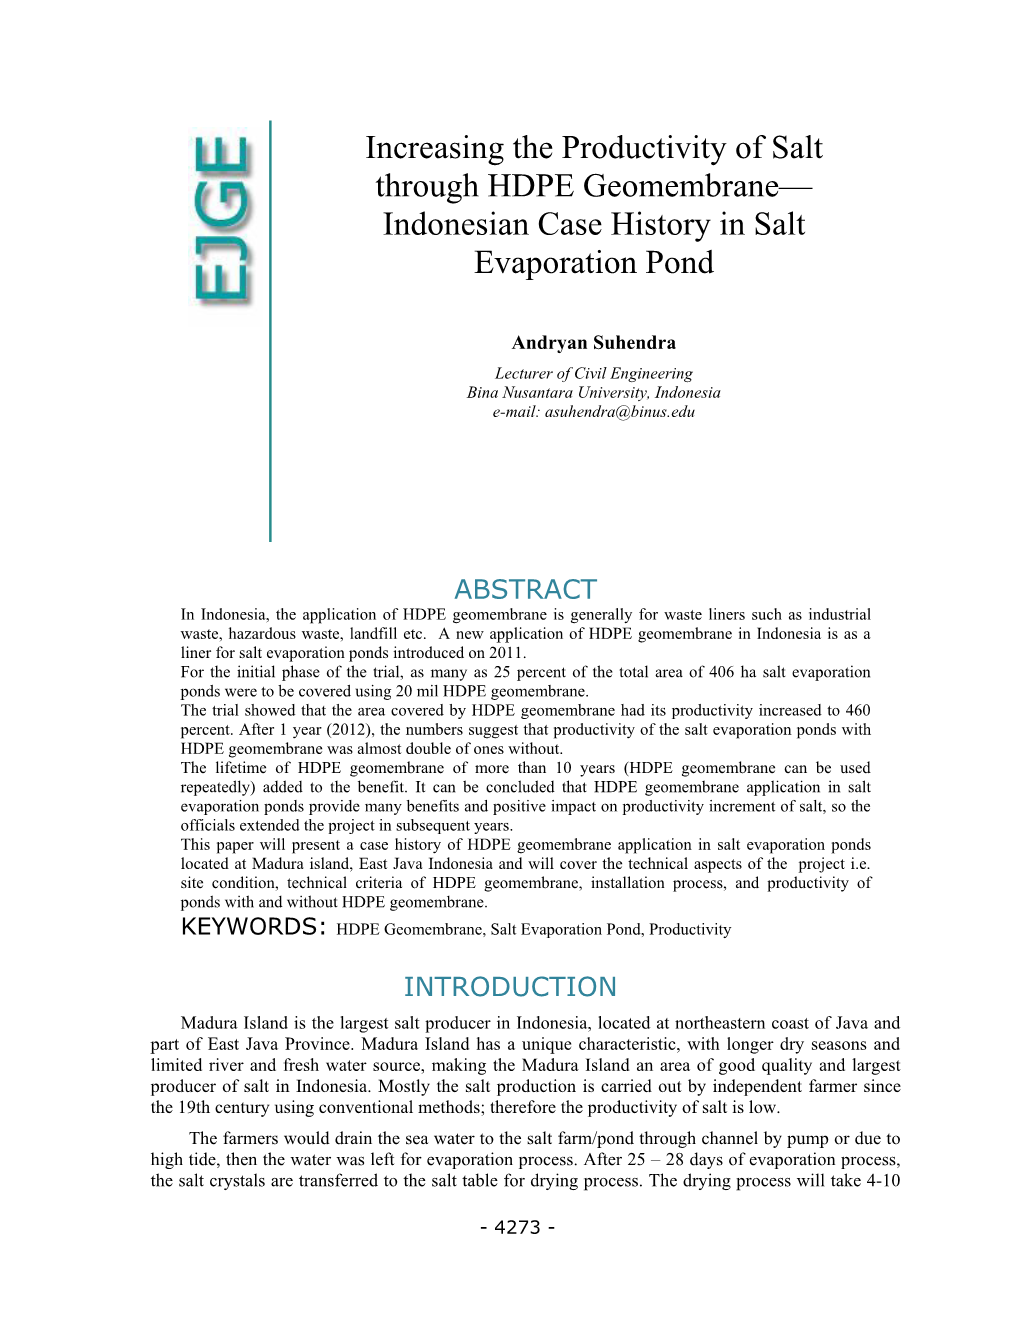 Increasing the Productivity of Salt Through HDPE Geomembrane— Indonesian Case History in Salt Evaporation Pond